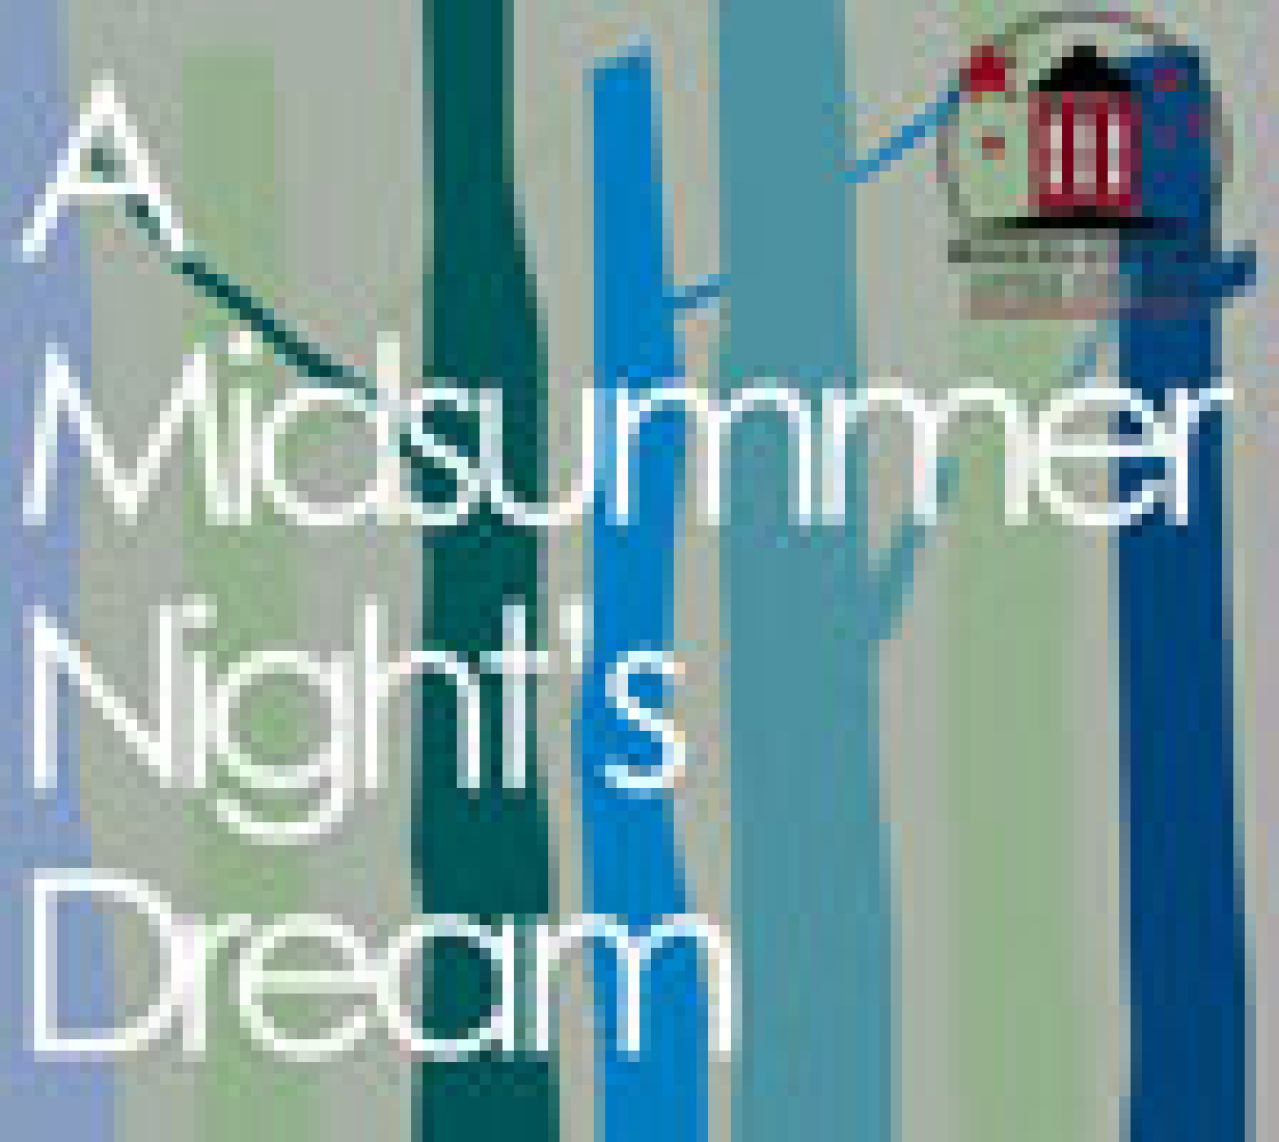 a midsummer nights dream logo Broadway shows and tickets